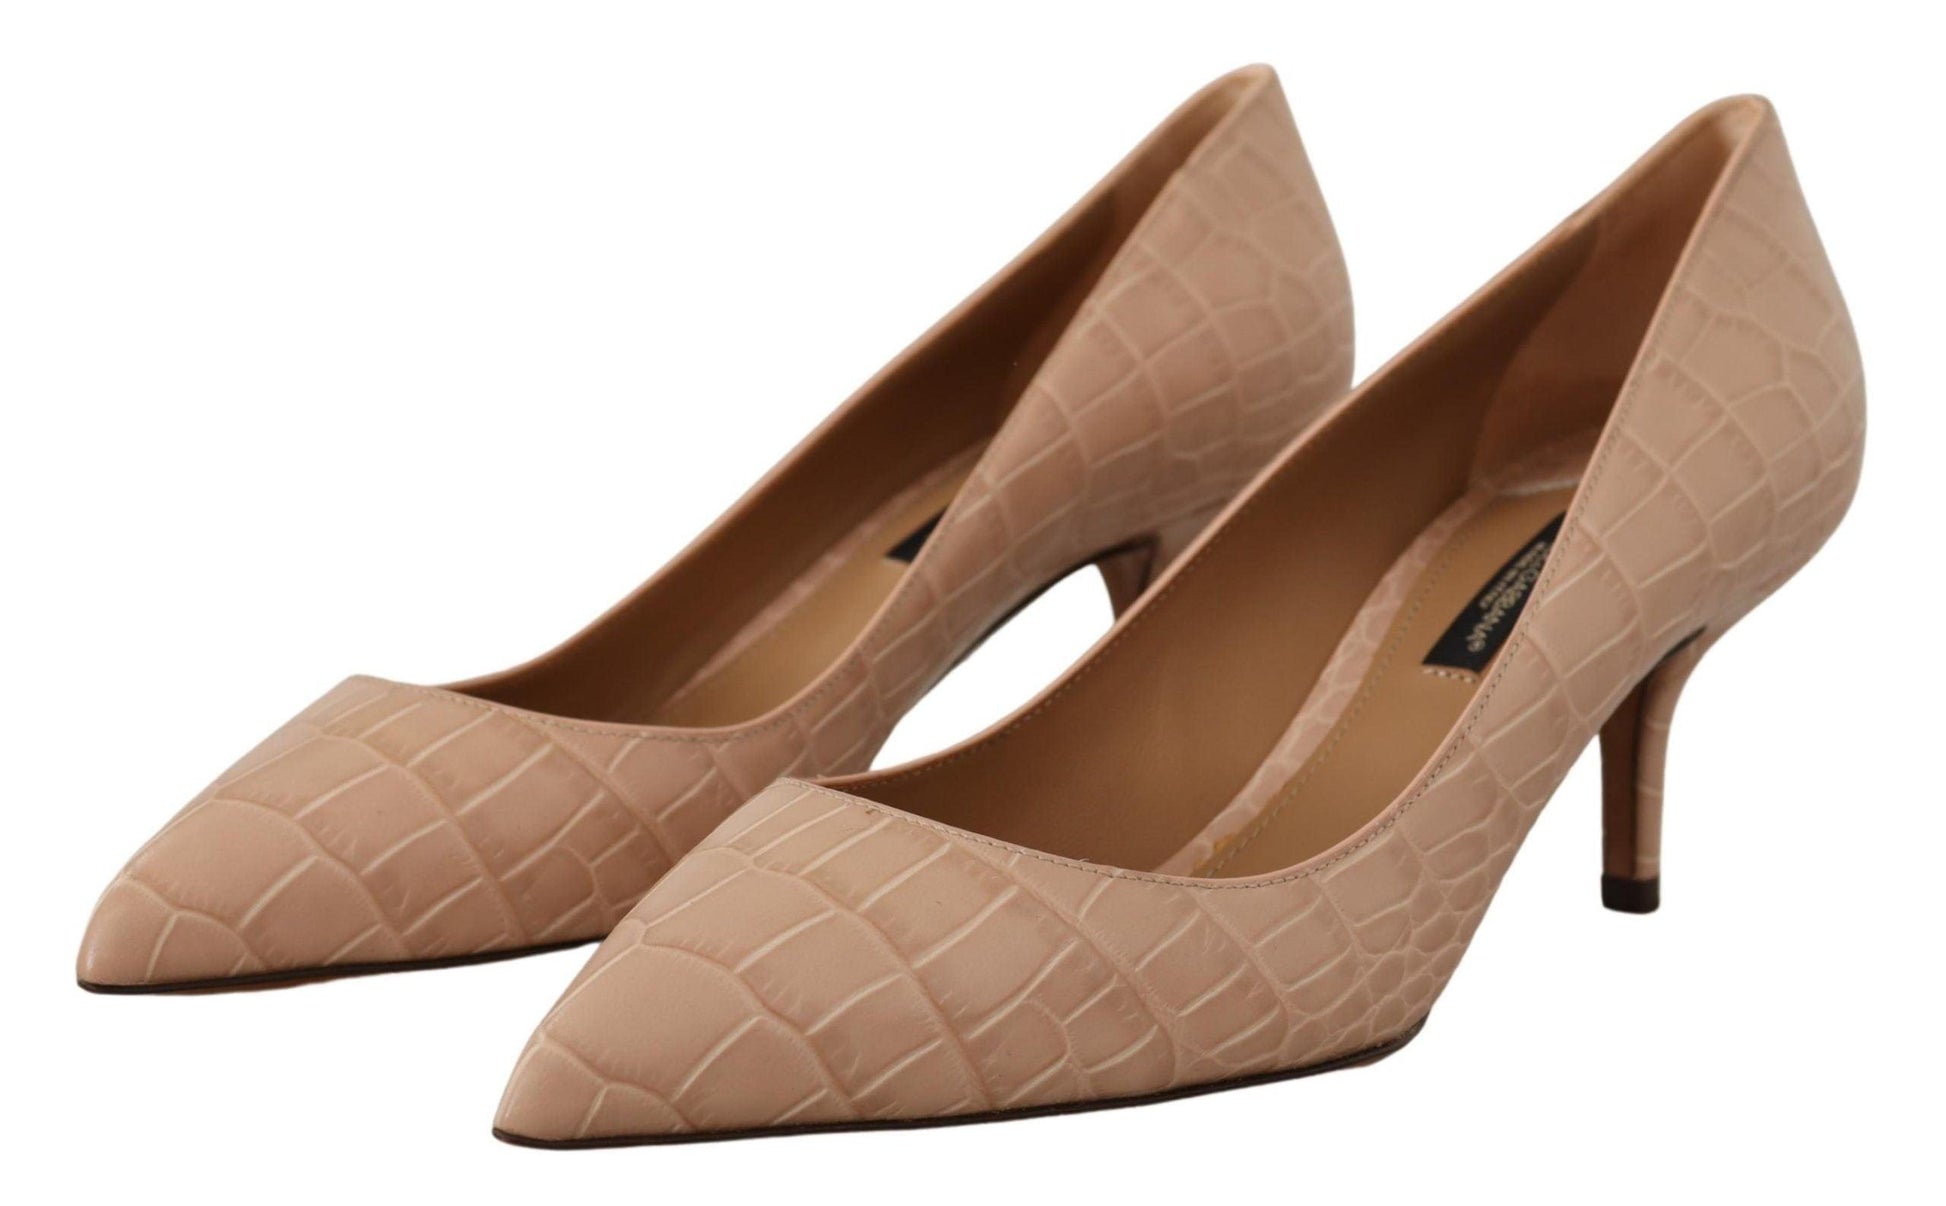 Dolce & Gabbana Beige Leather Pointed Heels Pumps Shoes - Designed by Dolce & Gabbana Available to Buy at a Discounted Price on Moon Behind The Hill Online Designer Discount Store